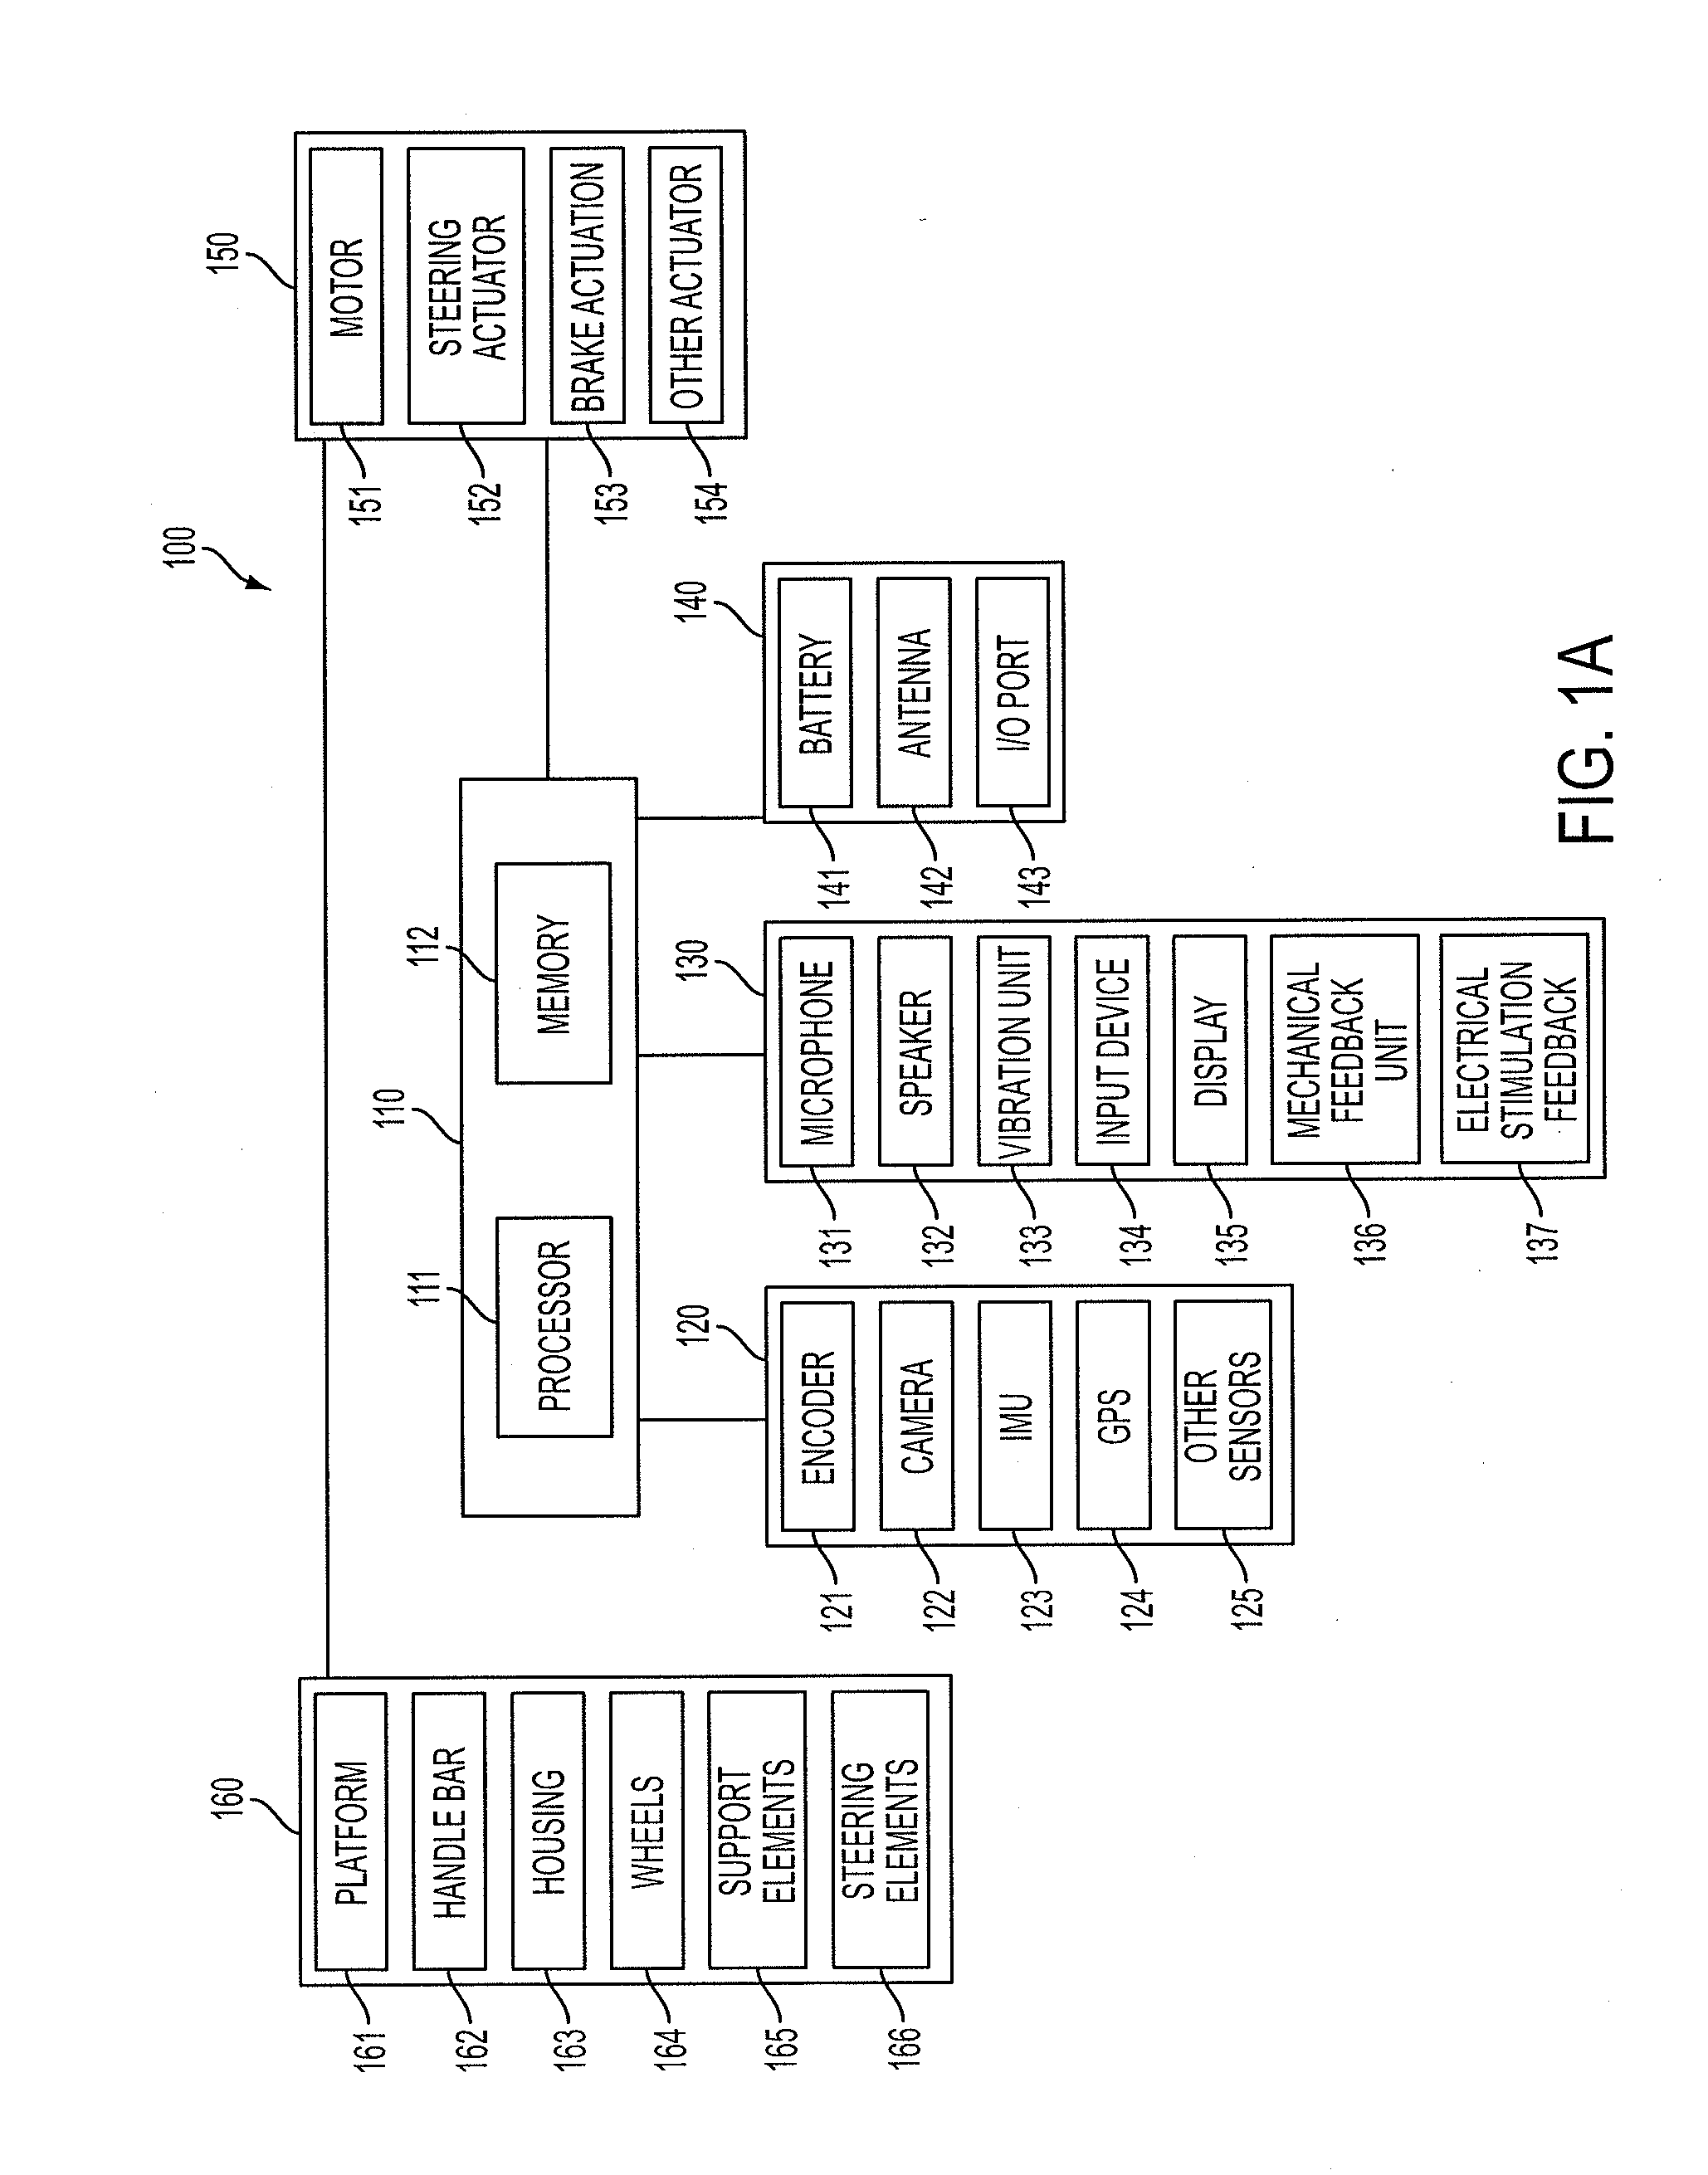 Intelligent mobility aid device and method of navigating and providing assistance to a user thereof